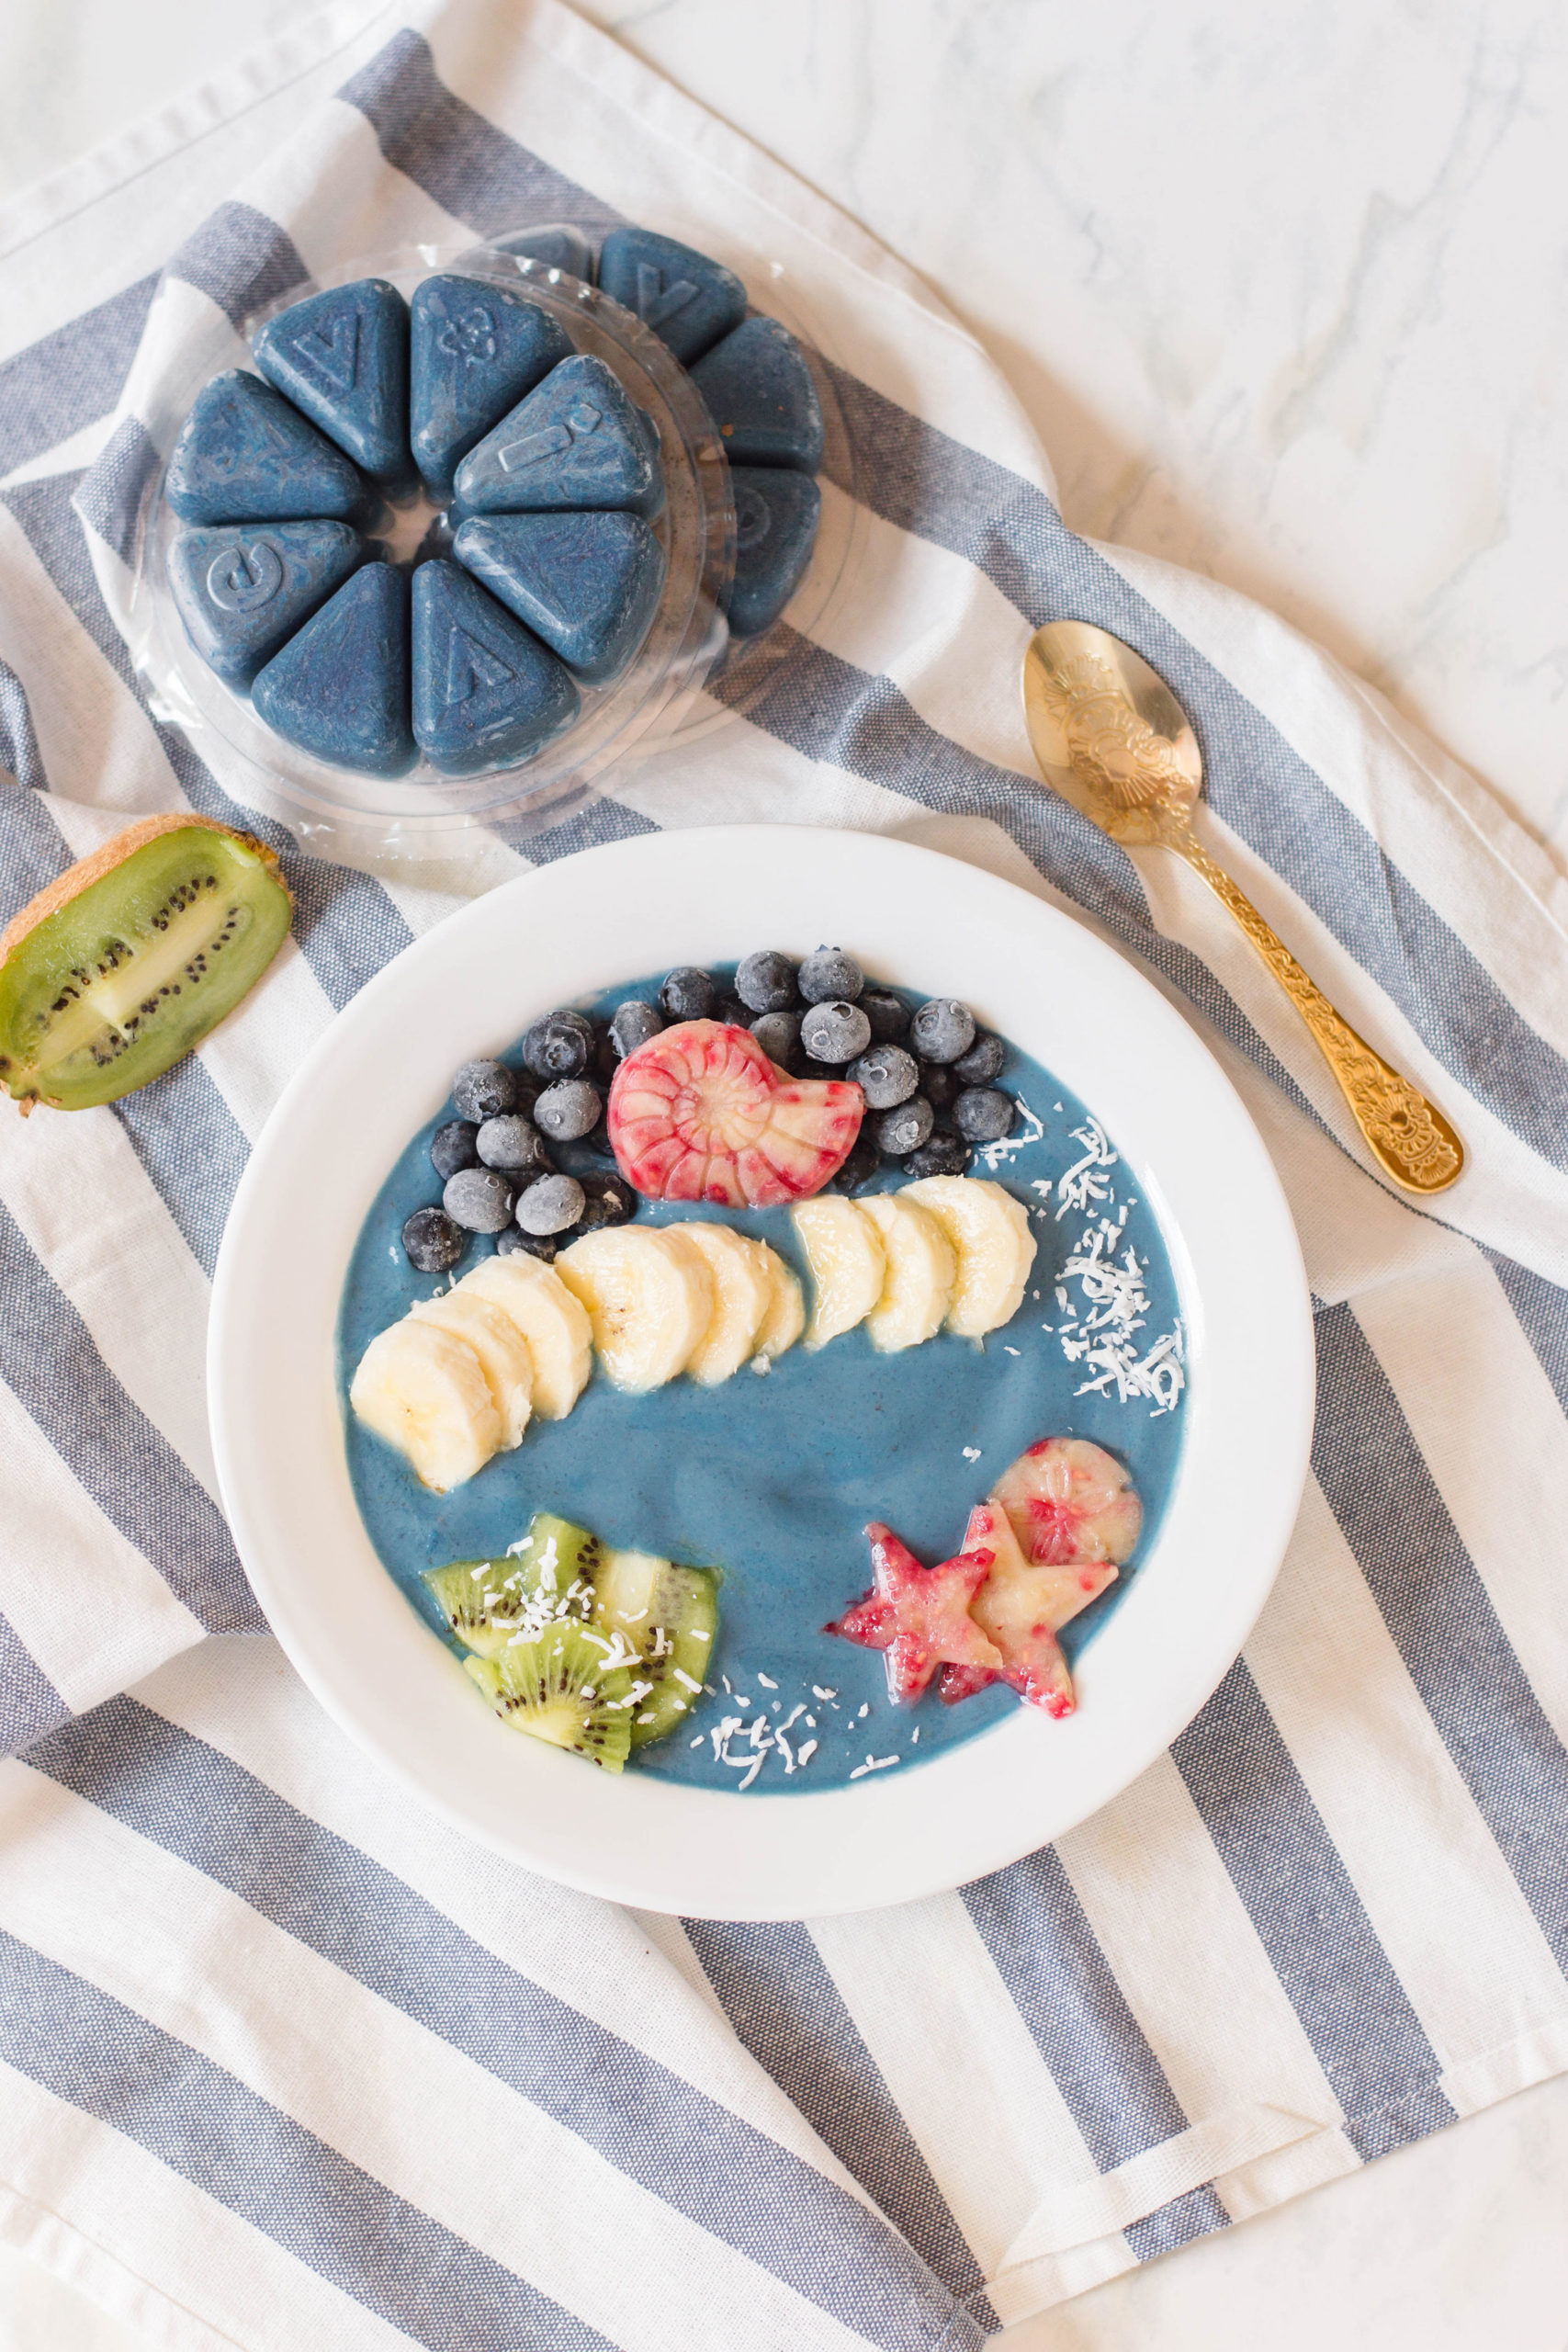 This Mermaid Smoothie Bowl has all the mermaid magic you need - and the deliciousness! Using an Evive Smoothie blend, this smoothie bowl came to life with the help of delicious, vibrant fruit like blueberries and kiwi. #smoothiebowl #breakfastgoals